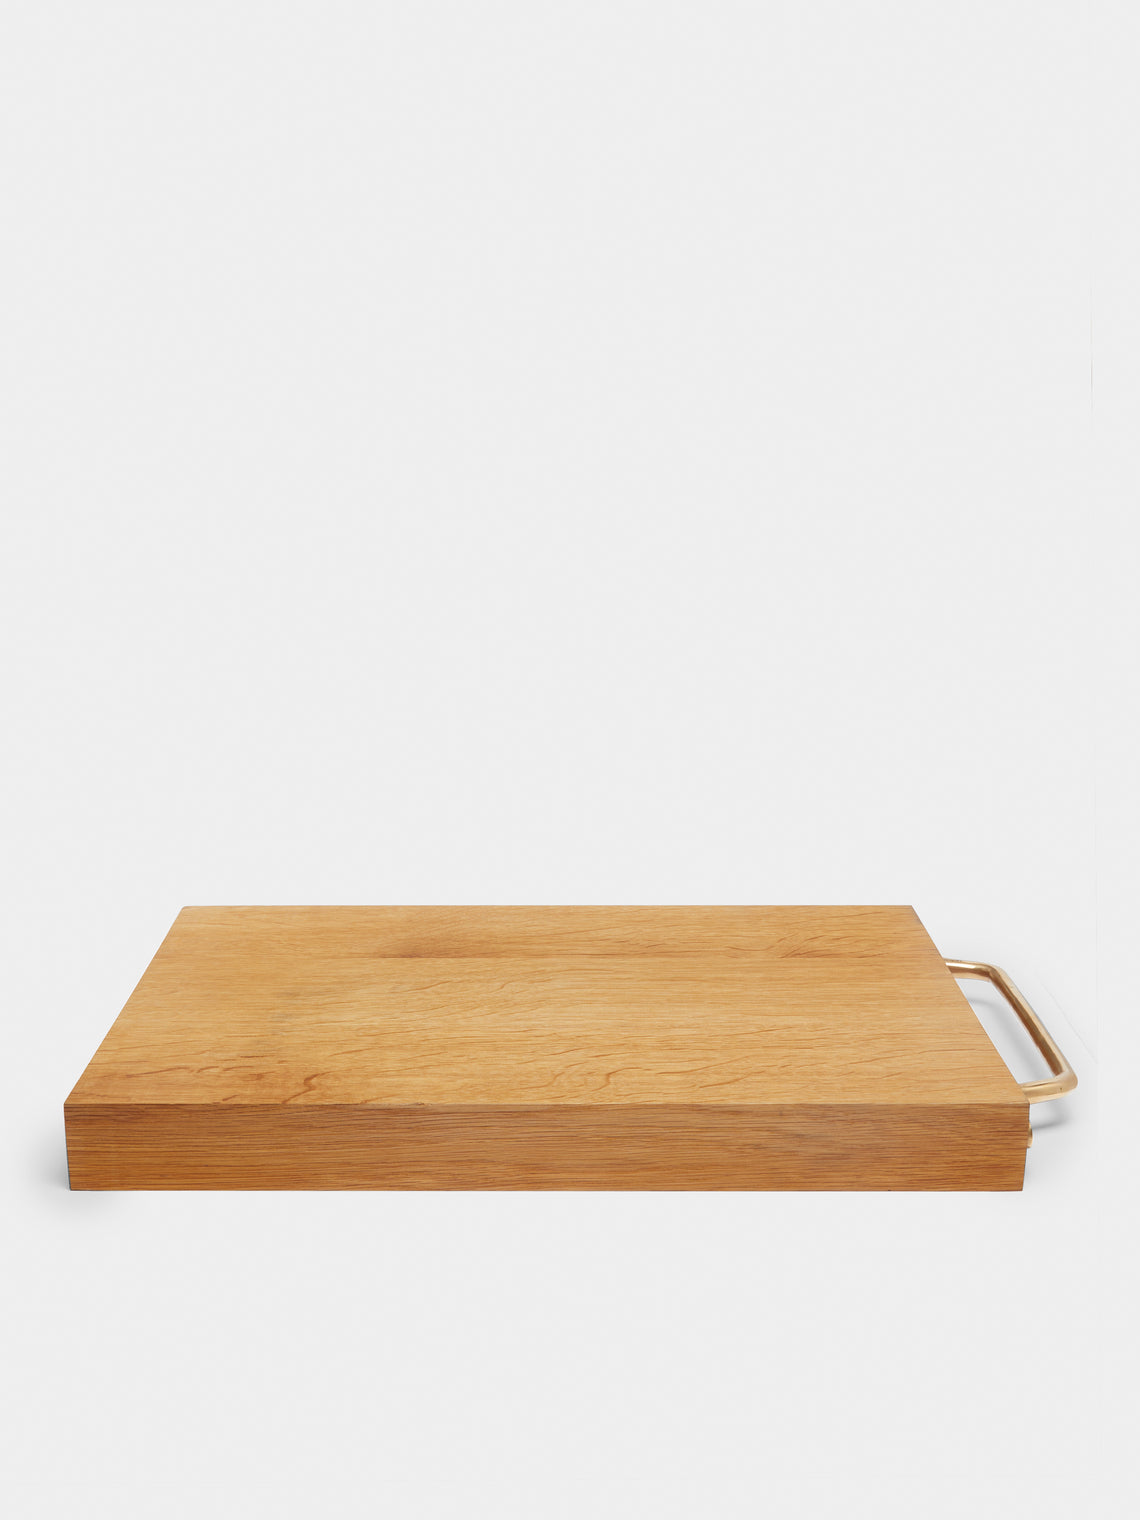 Woodworks by Ted Todd - Chopping Board in Antique Oak -  - ABASK - 